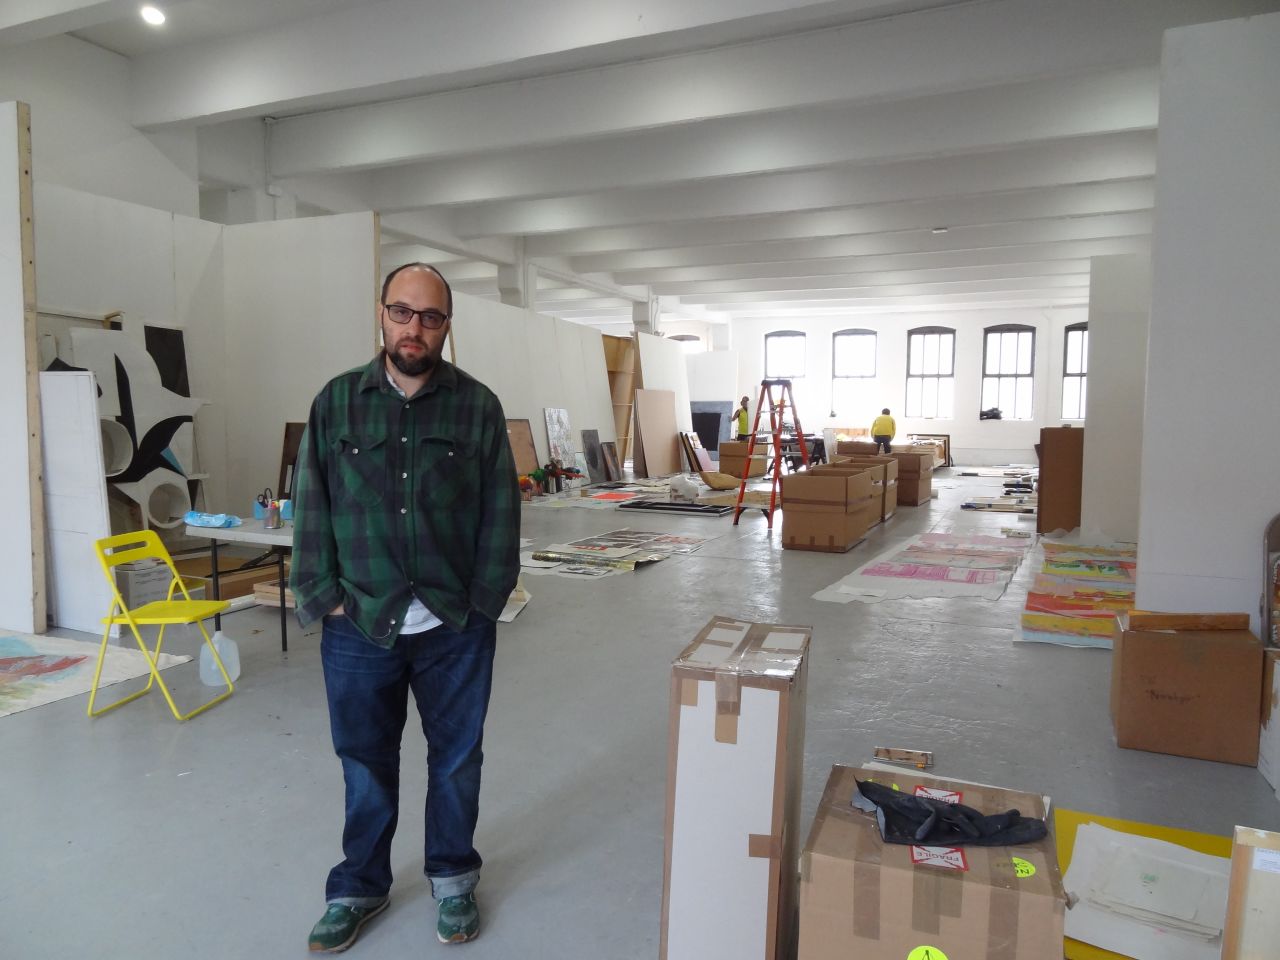 Zach Feuer, temporarily using the floor above his gallery, stands in front of art being salvaged from his space.